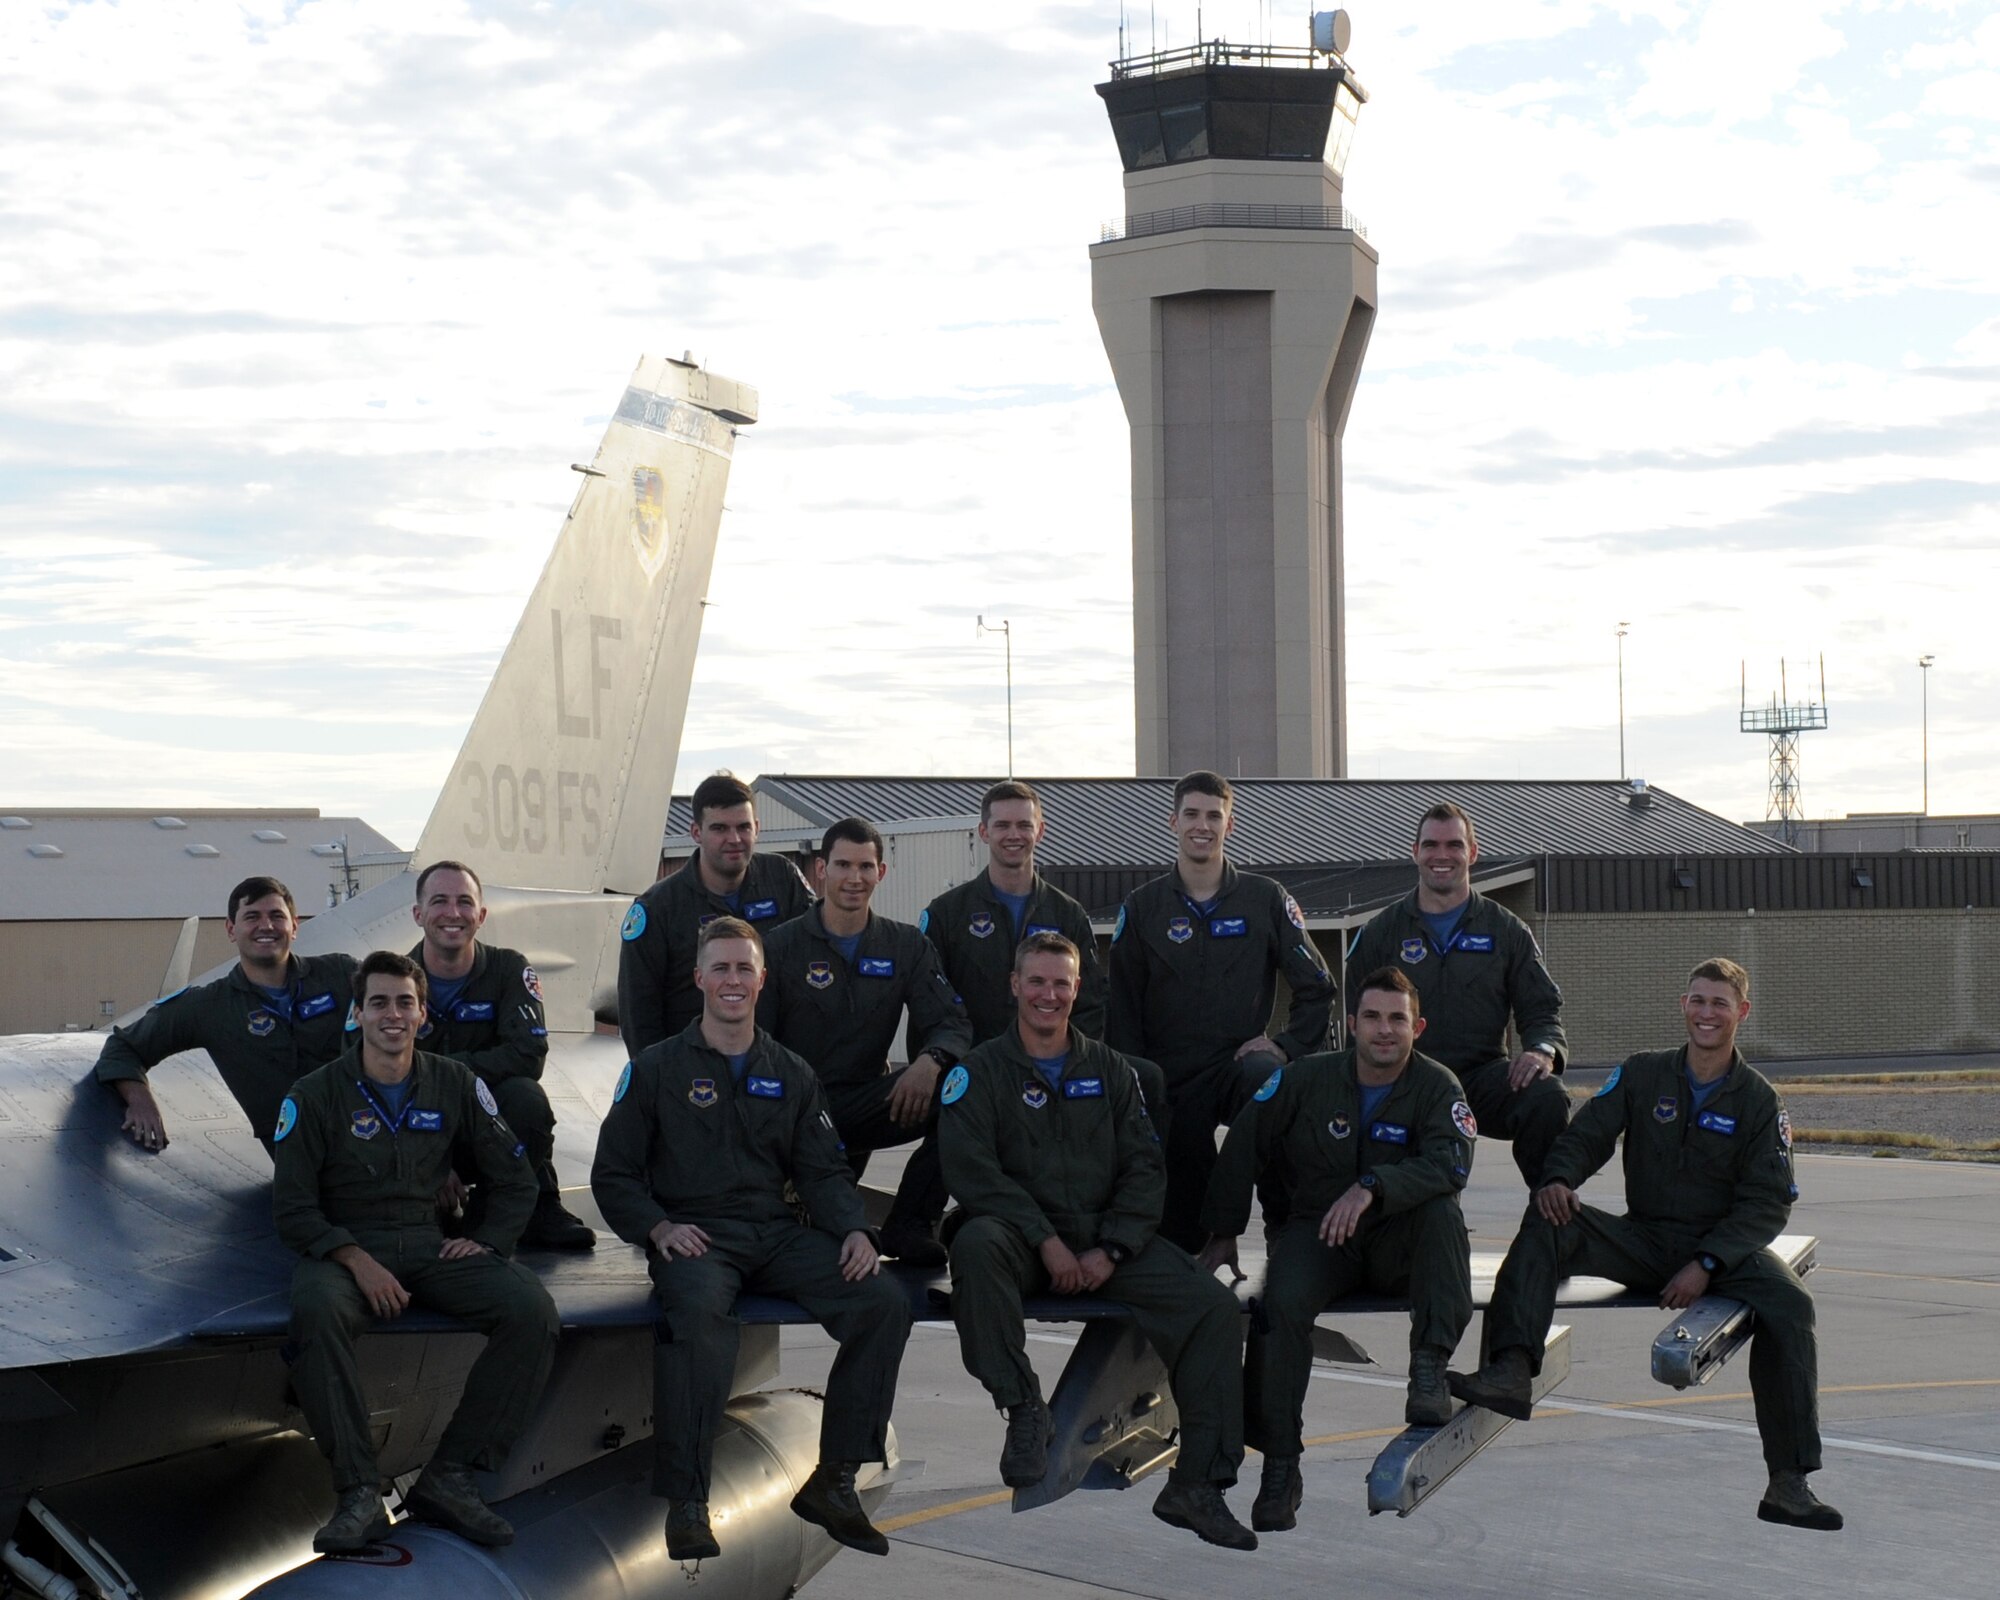 The 309th Fighter Squadron graduated 12 F-16 Fighting Falcon pilots to the combat Air Force. FRONT ROW: 1st Lt. Tim Joubert, Capt. James French, Maj. David Sproehnle, Capt. Joseph Atherton and 1st Lt. Taylor Absher. BACK ROW: 1st Lts. Kaleb Jenkins, Spencer Peot and Kevin Dugan, Capt. Casey Habluetzel, 1st Lt. J.B. Scott, Capt. Dan Lacroix and 1st Lt. Mitch McKenzie. (Courtesy photo)